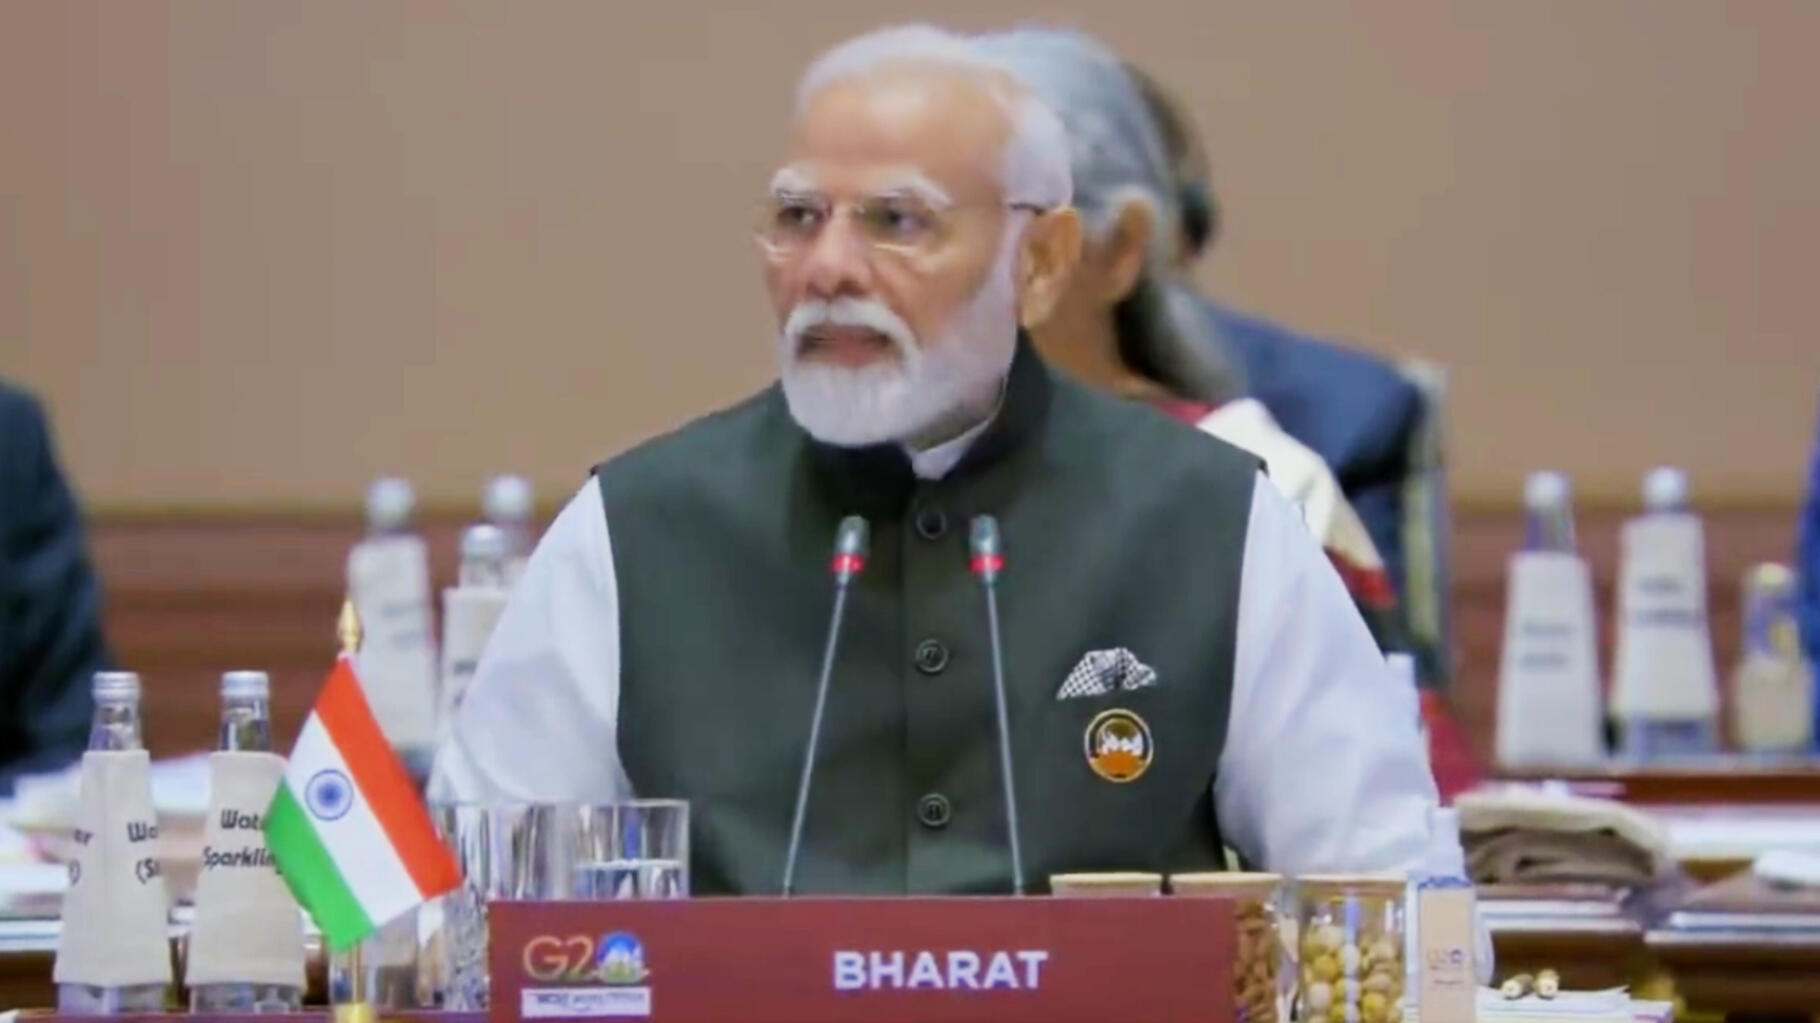 At the G-20 summit in New Delhi, Narendra Modi is not presenting himself as the Prime Minister of India but rather the Prime Minister of Bharat